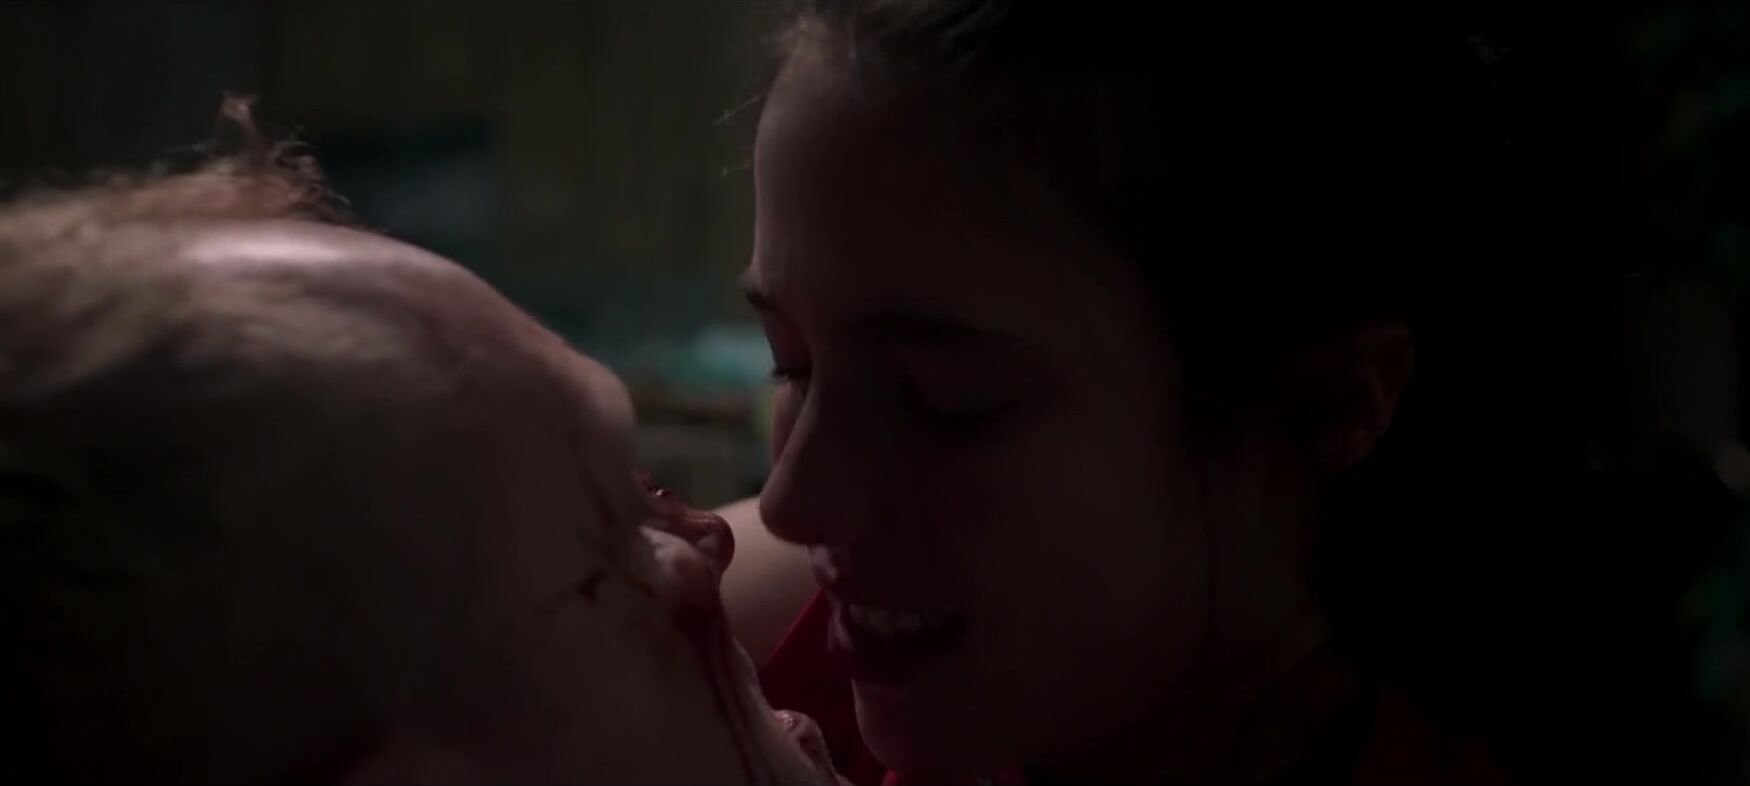 Boobies Nude and sex moments of skinny sexual pervert Margaret Qualley from Donnybrook (2018) Amateur Vids - 1